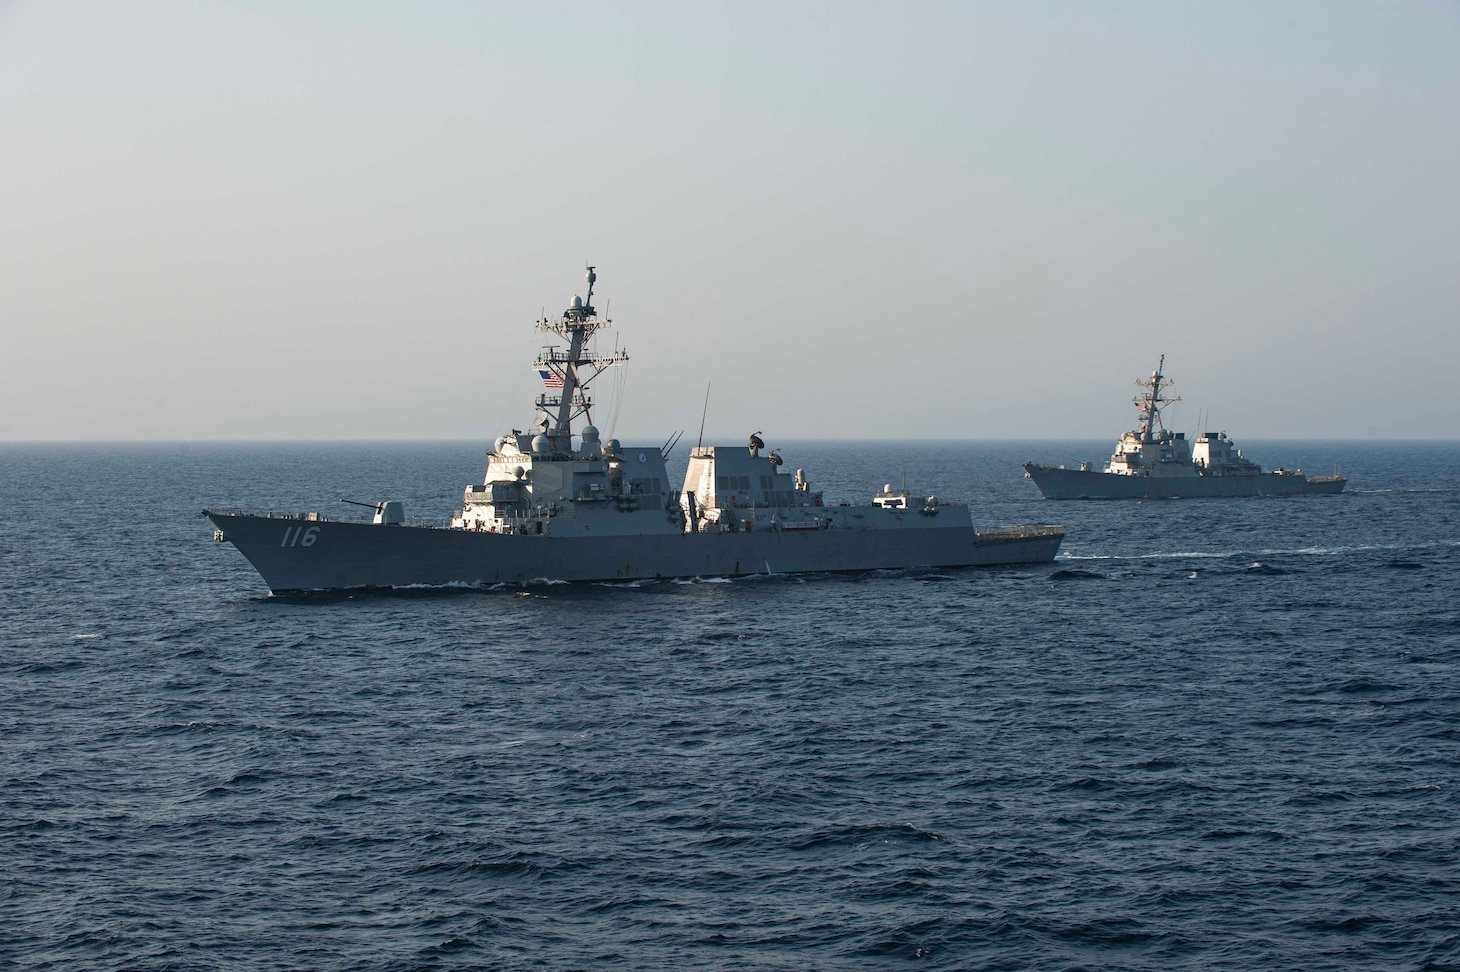 USS Thomas Hudner (DDG 116) and USS Laboon (DDG 58) sail in formation alongside the aircraft carrier USS Dwight D. Eisenhower (CVN 69) in the Arabian Sea.